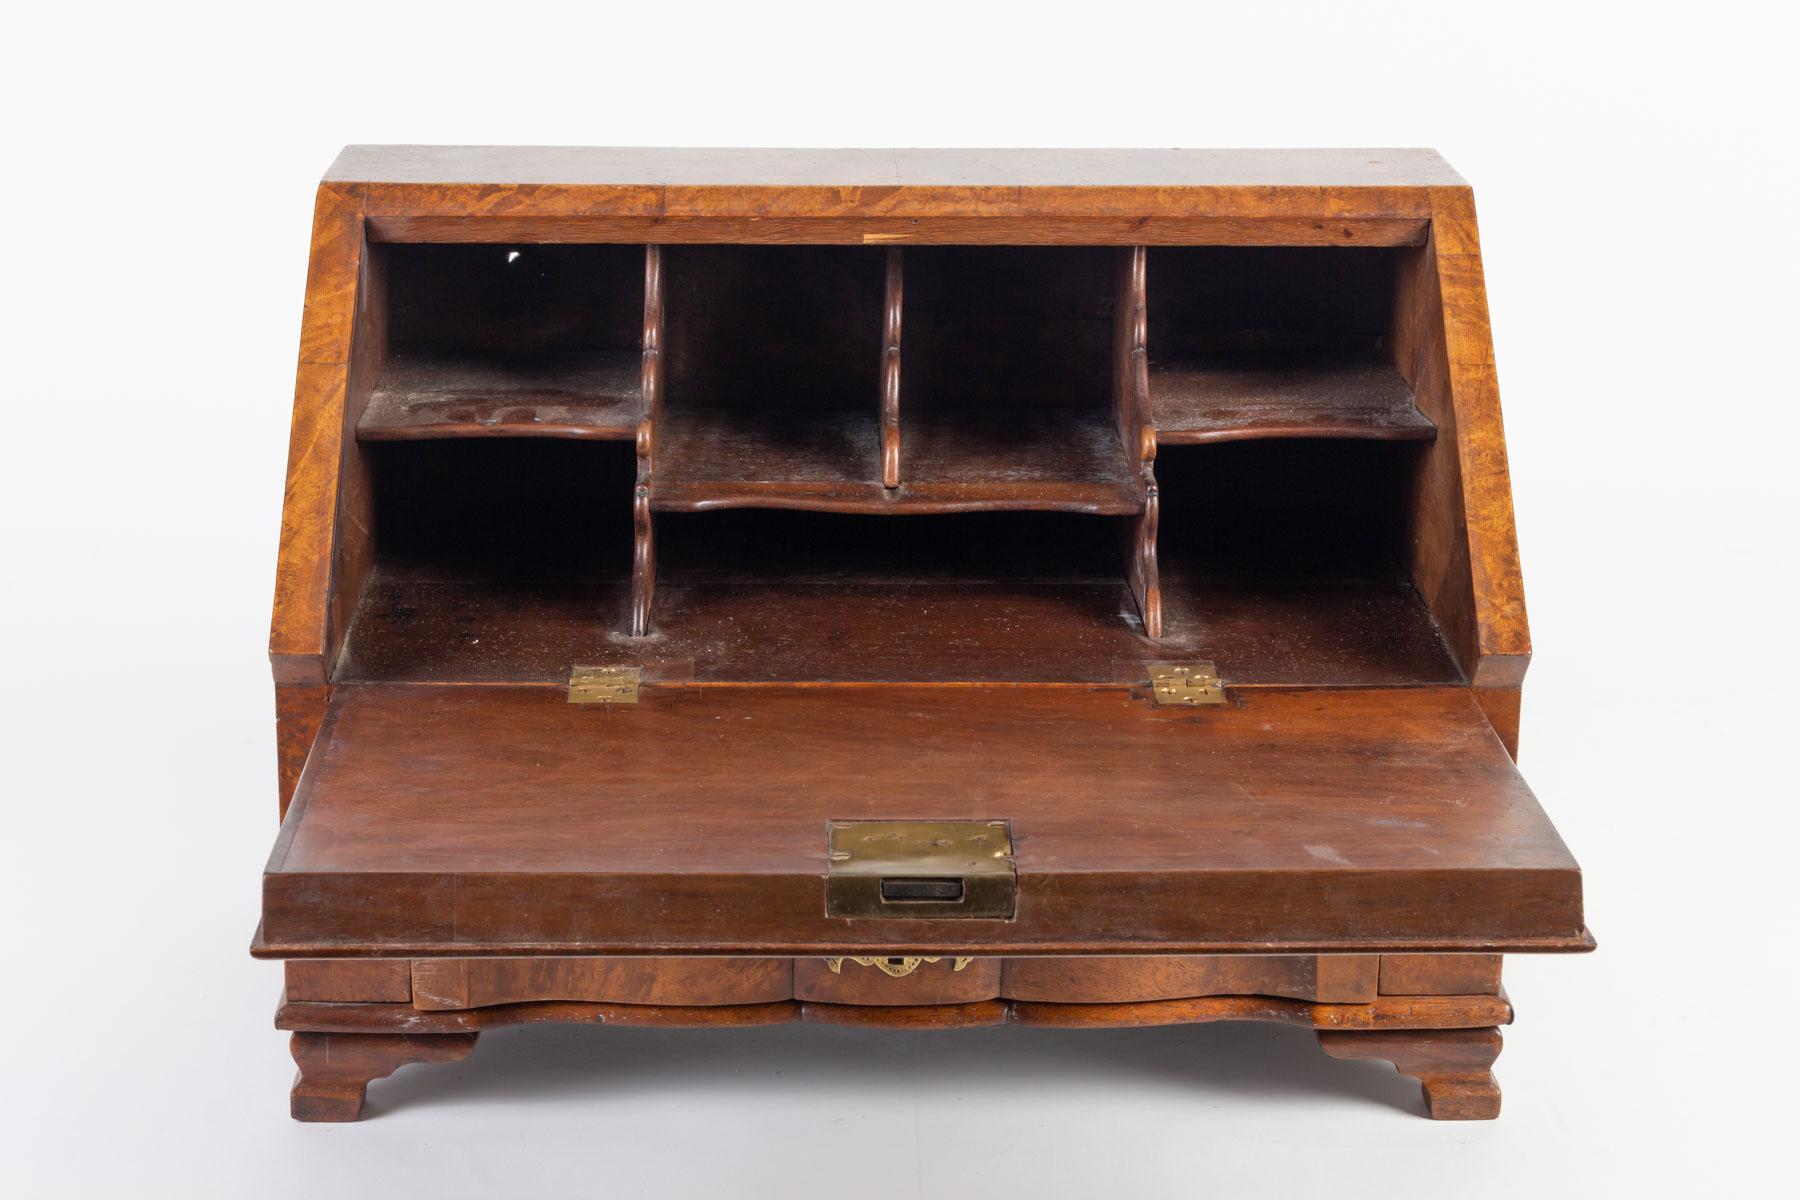 Wood Trade Furniture Forming a Miniature Secretary Writing Table, 19th Century